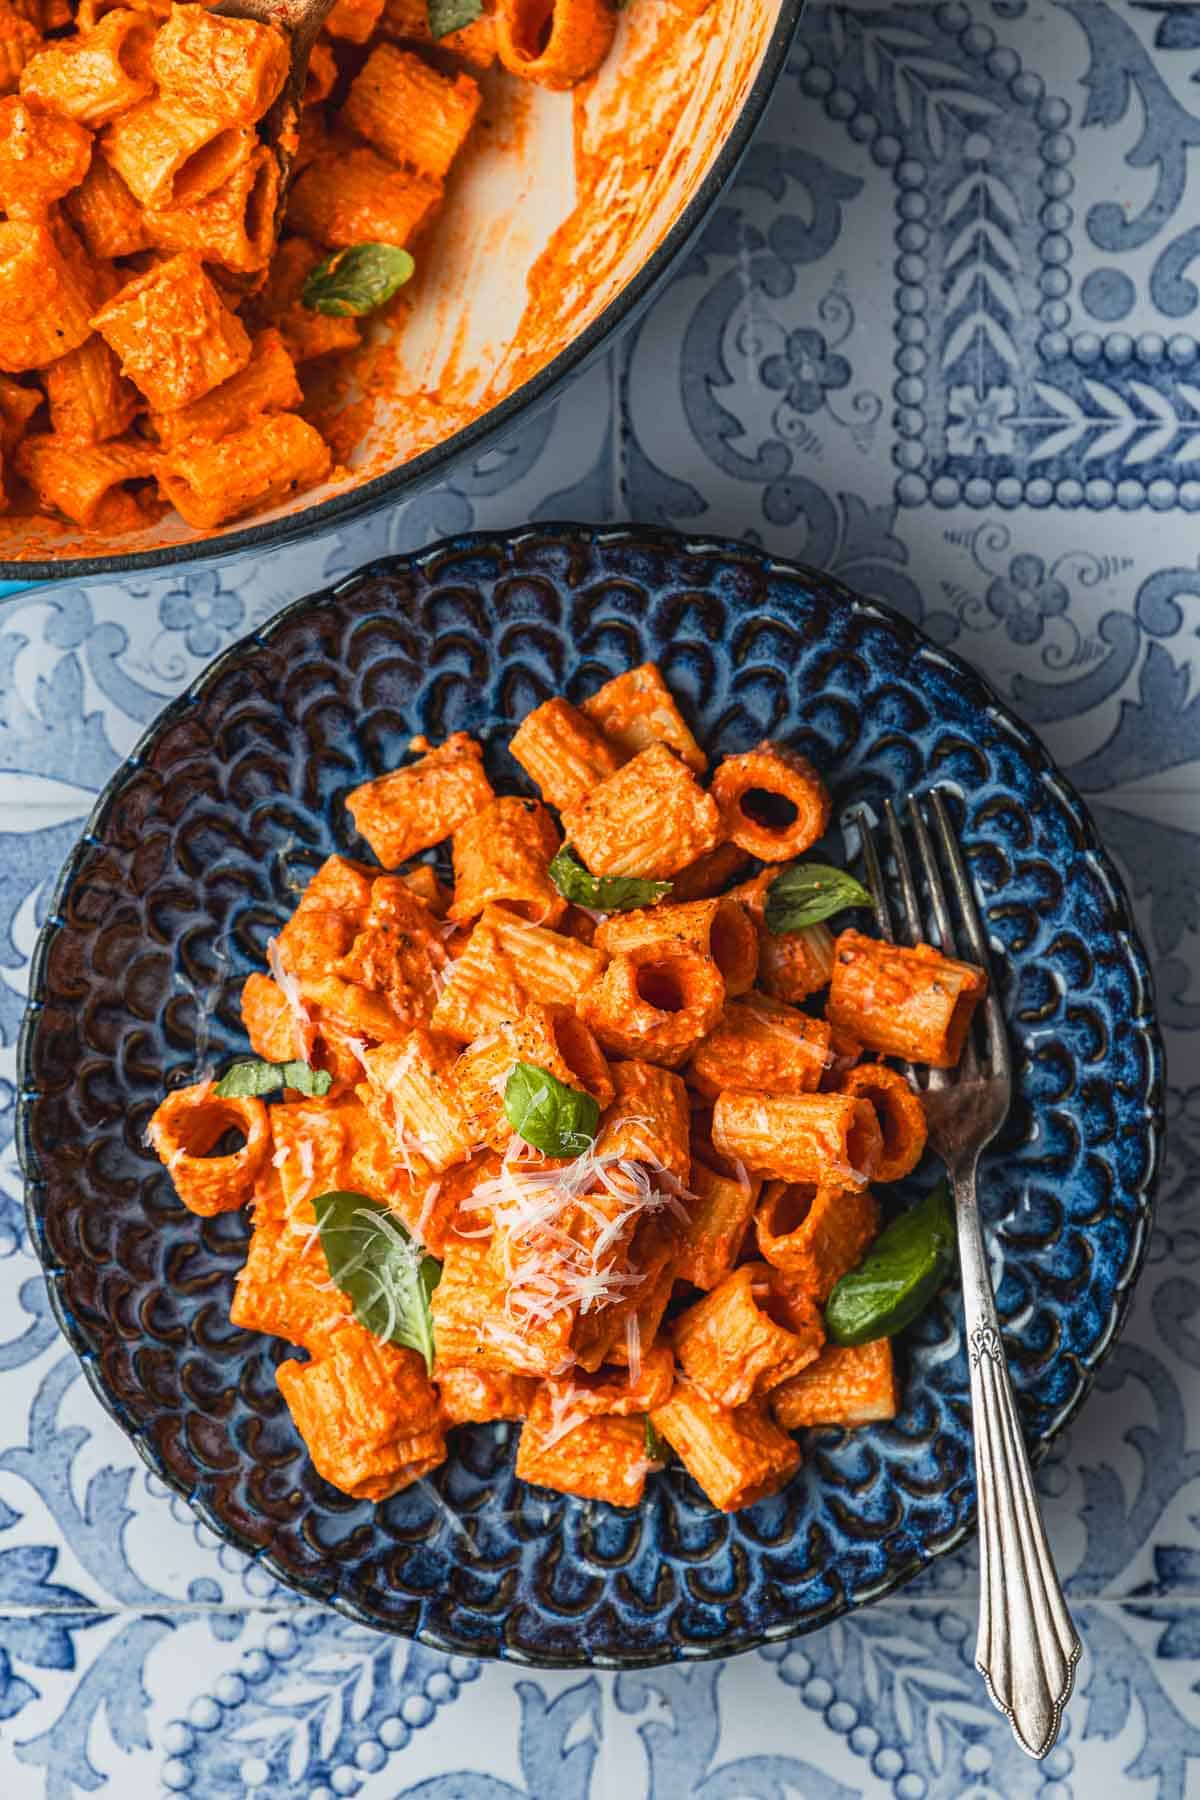 Roasted Red Pepper Pasta | The Mediterranean Dish